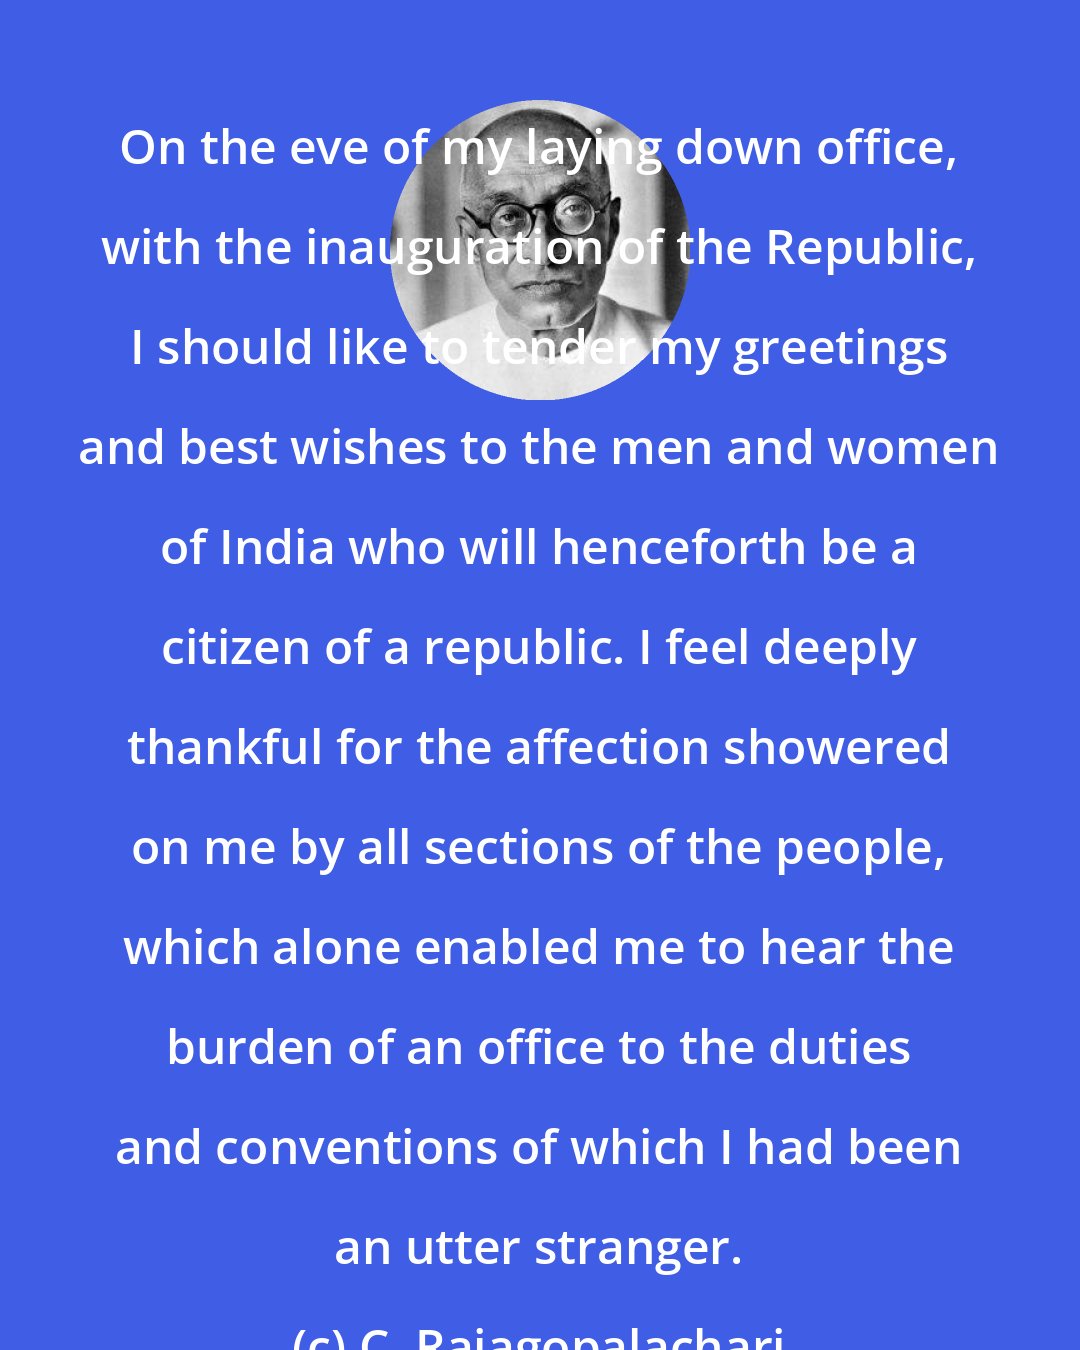 C. Rajagopalachari: On the eve of my laying down office, with the inauguration of the Republic, I should like to tender my greetings and best wishes to the men and women of India who will henceforth be a citizen of a republic. I feel deeply thankful for the affection showered on me by all sections of the people, which alone enabled me to hear the burden of an office to the duties and conventions of which I had been an utter stranger.